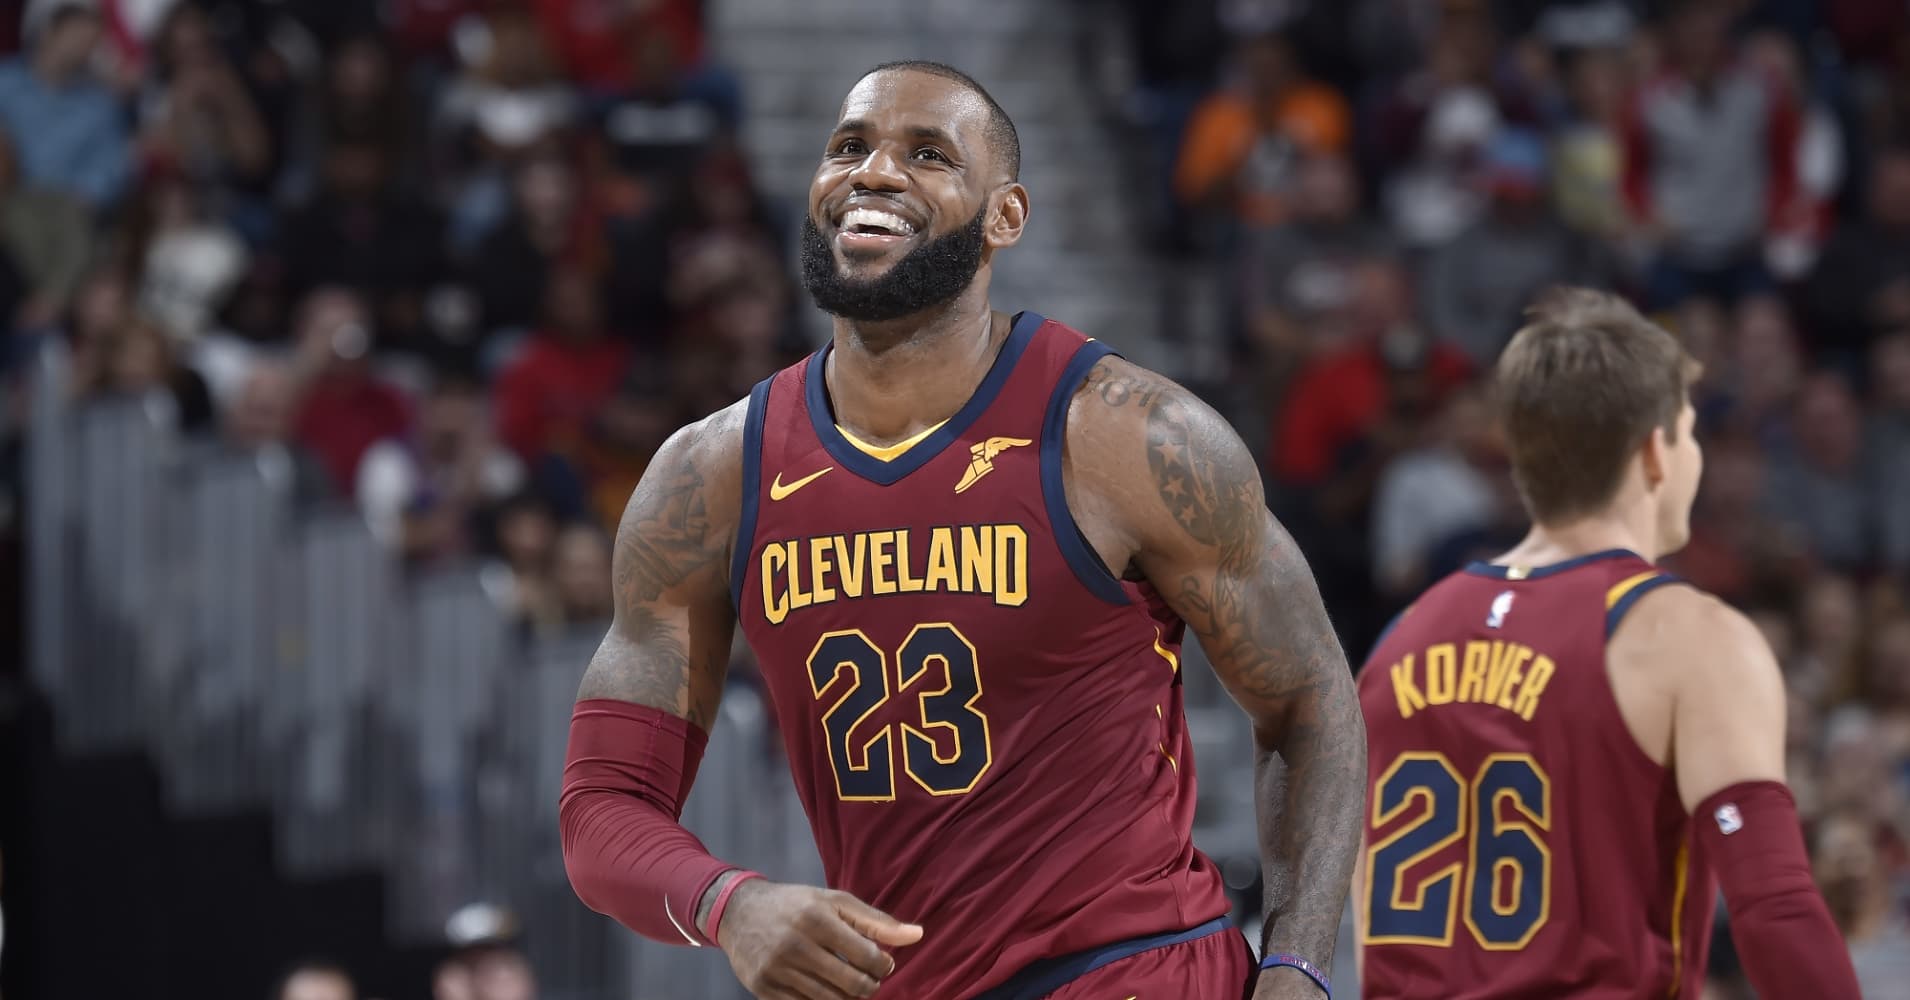 What you can learn from LeBron James' confidence on Instagram